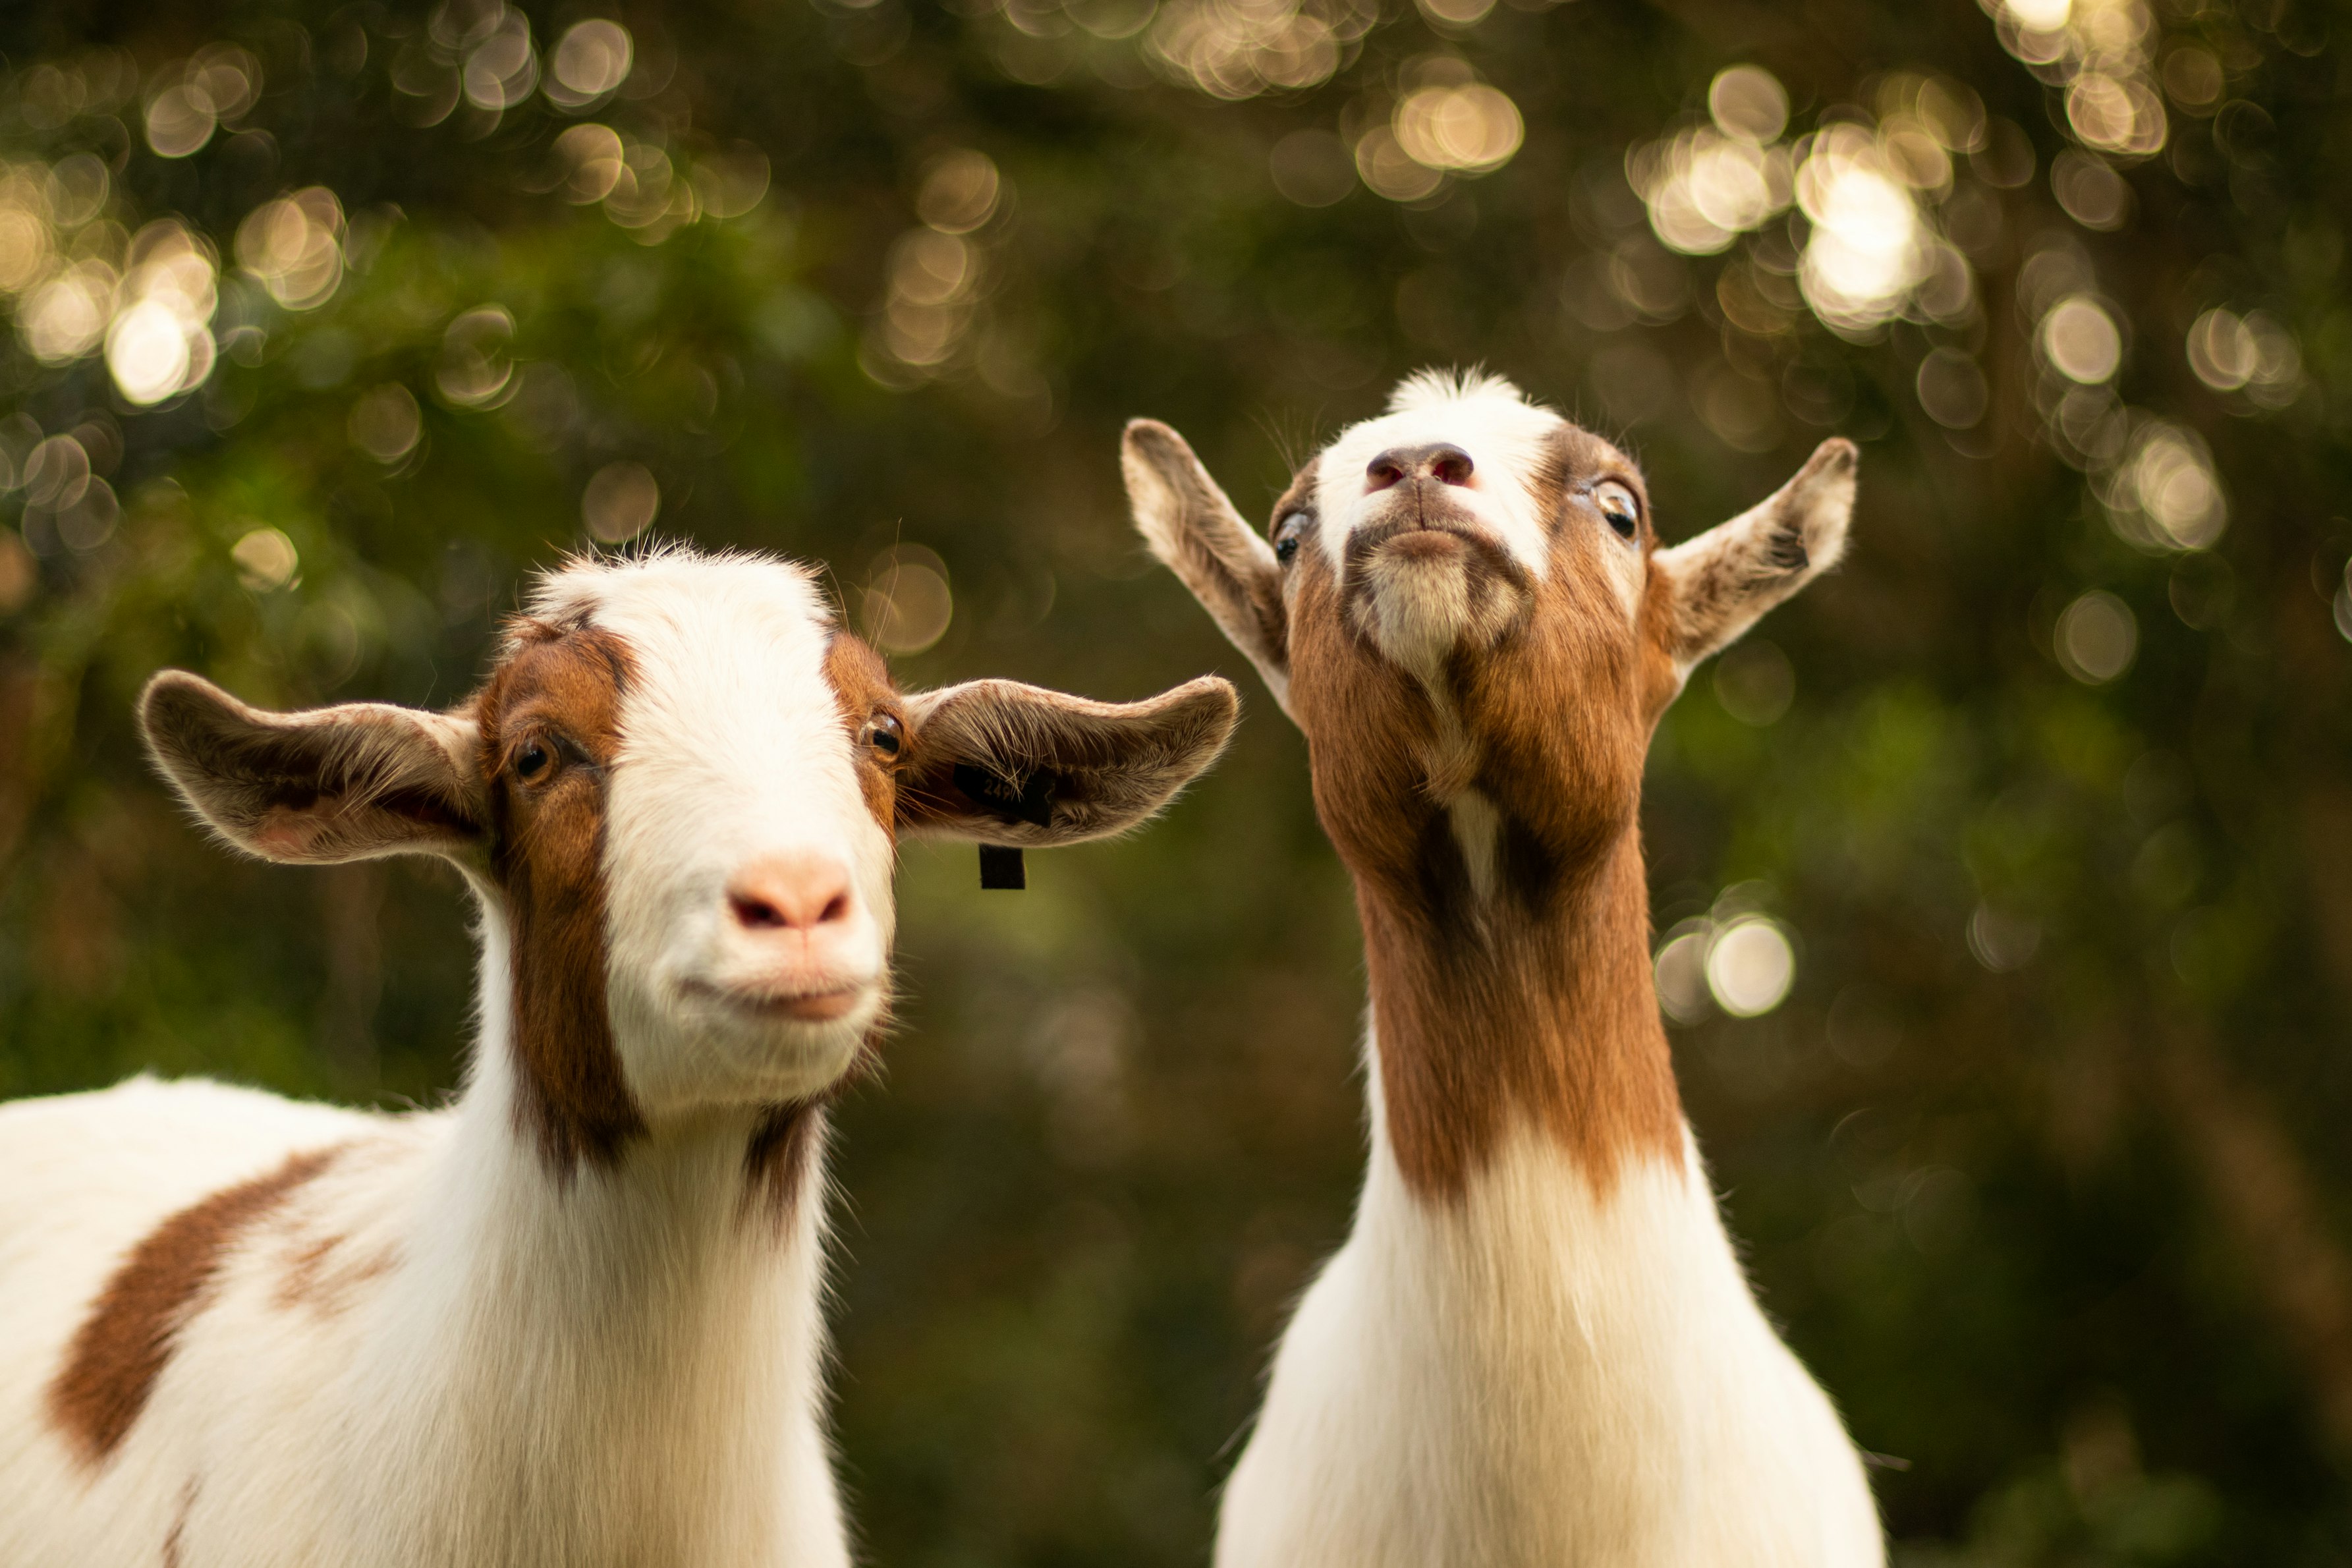 The Unconventional Weapon Against Future Wildfires: Goats